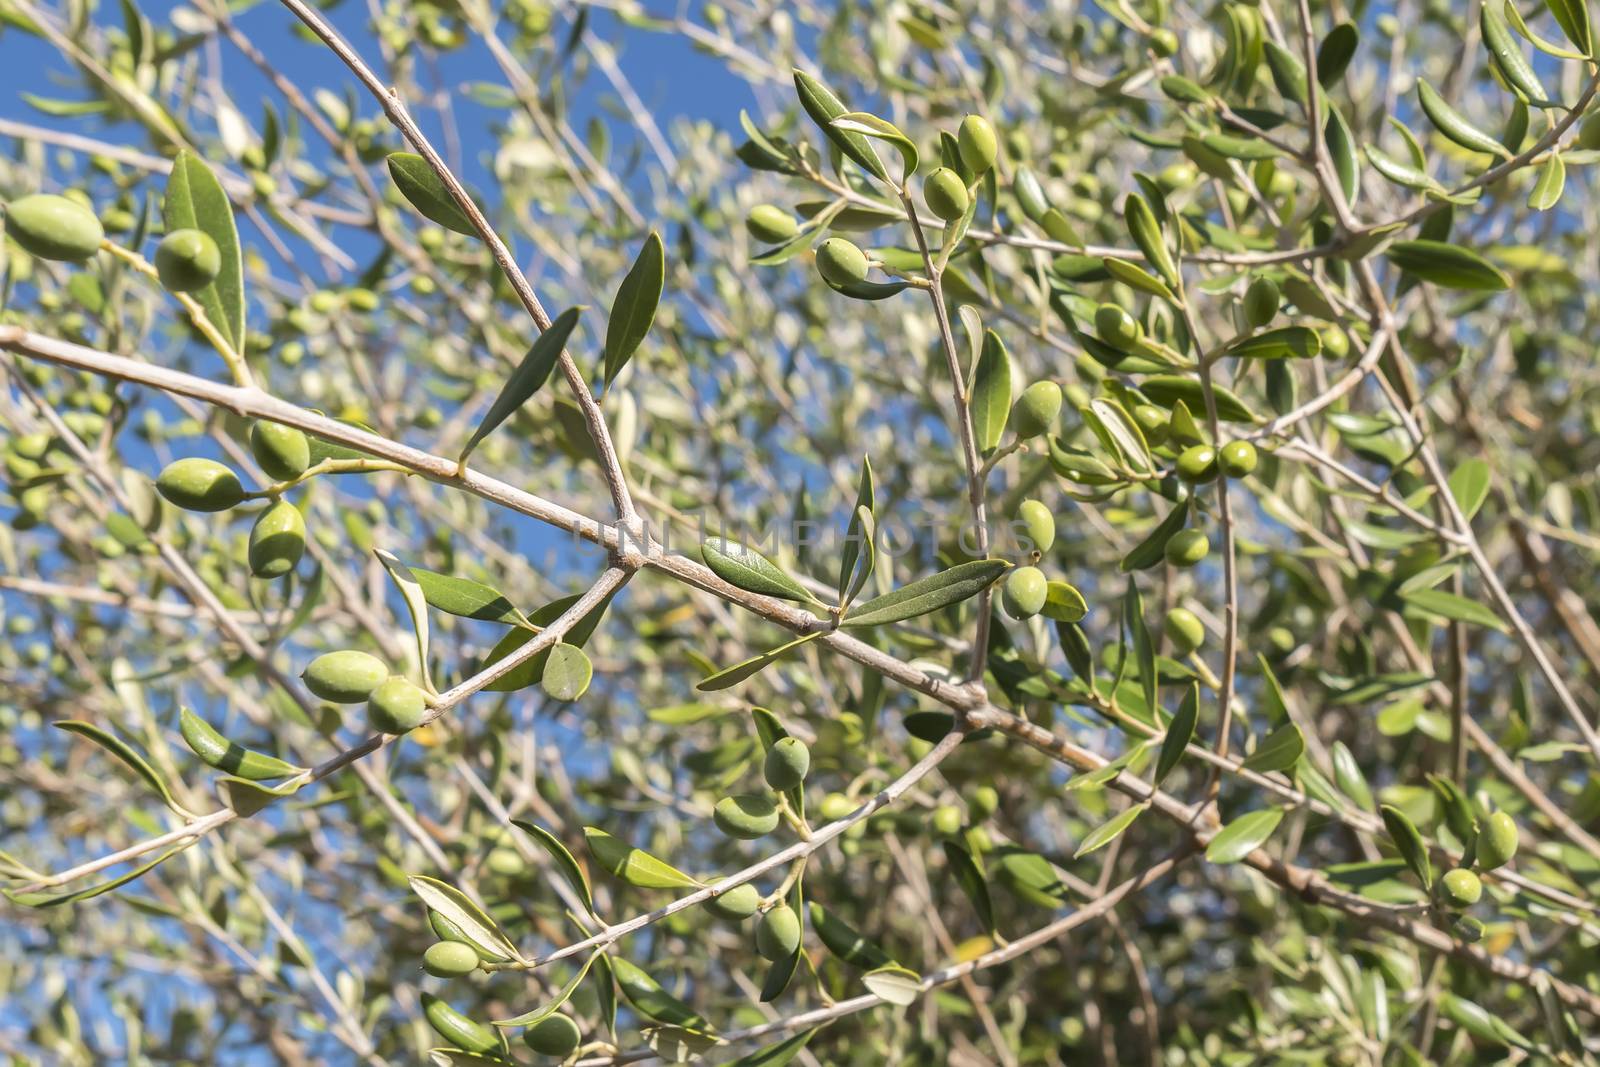 Olives in the olive tree